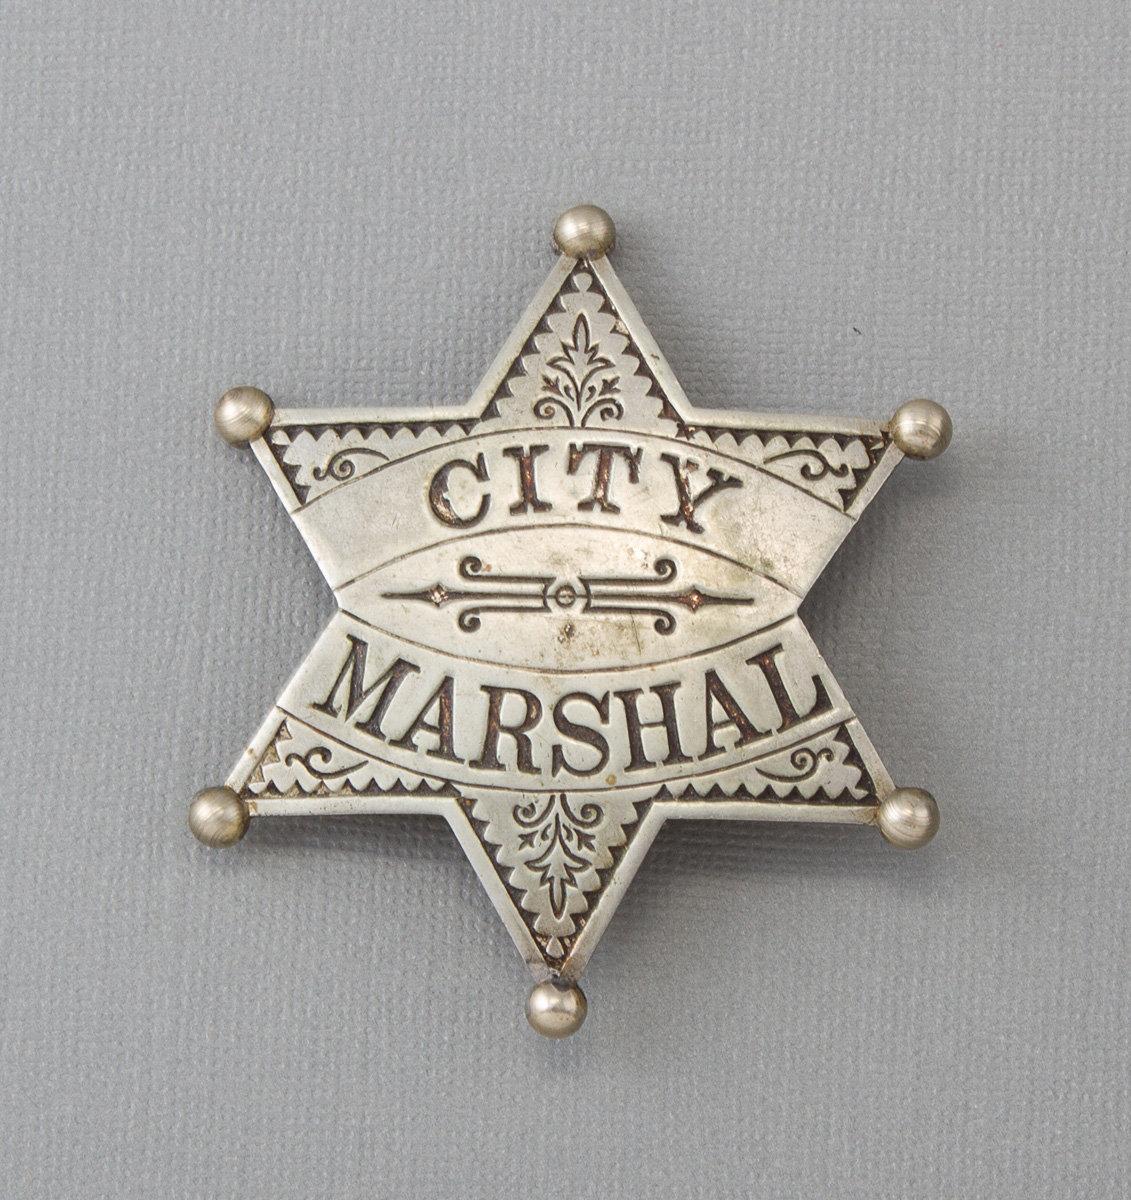 Ornate City Marshal Badge, six point ball star, 2 5/8" across points, turn of the century.  George J